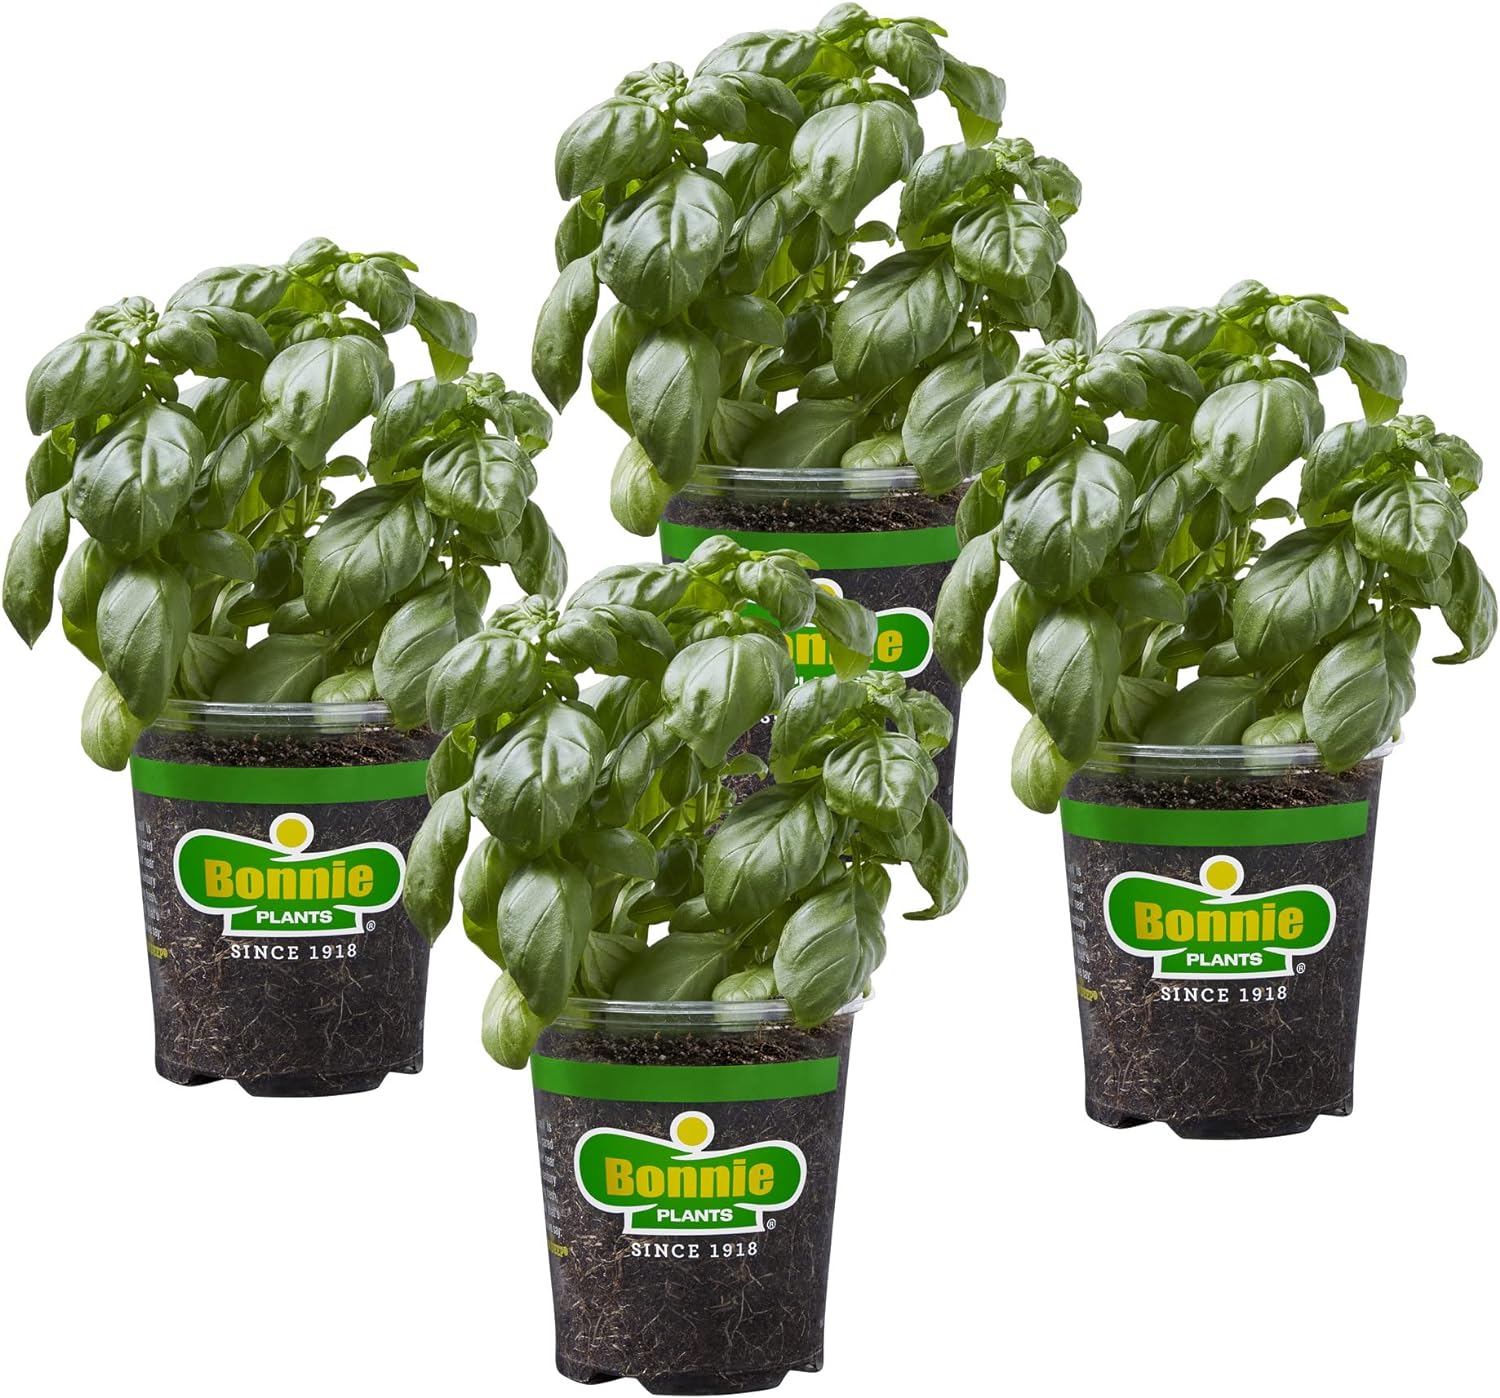 Prime Members: 4-Pack Bonnie Plants: Sweet Basil $16.65, Strawberry $15.80 & More + Free S&H